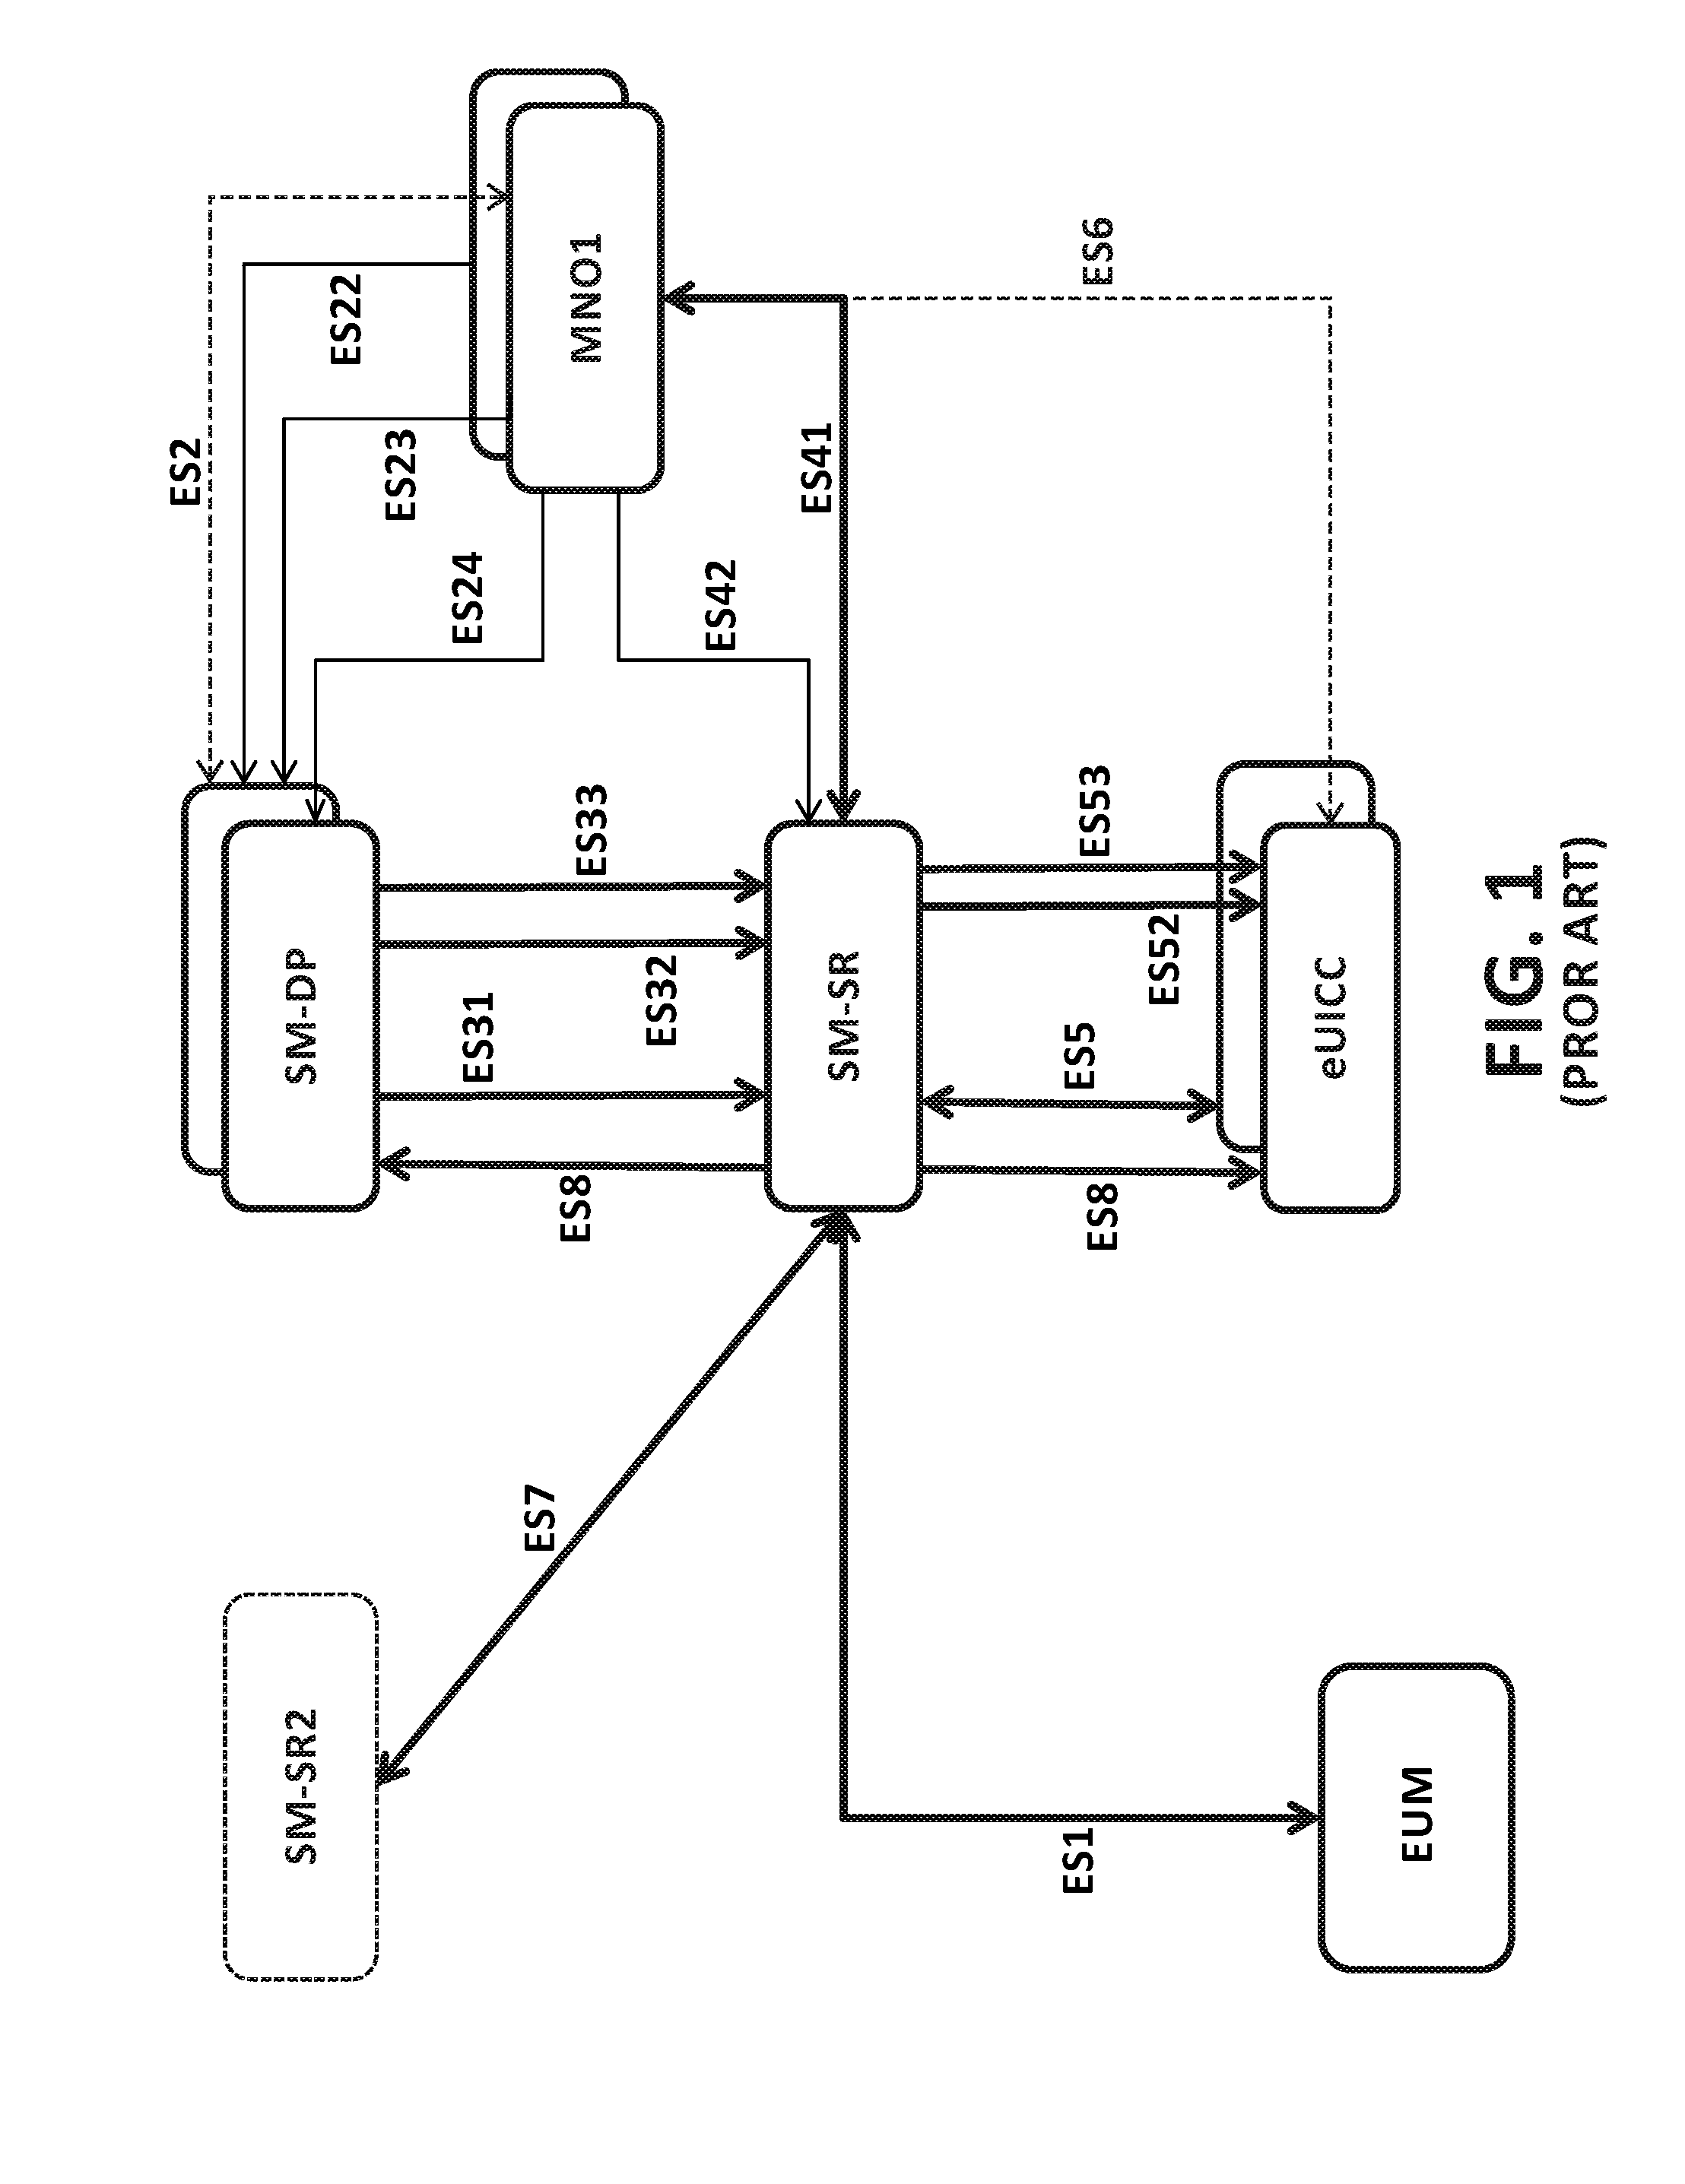 Method and System for Dynamic Managing of Subscriber Devices in Mobile Networks